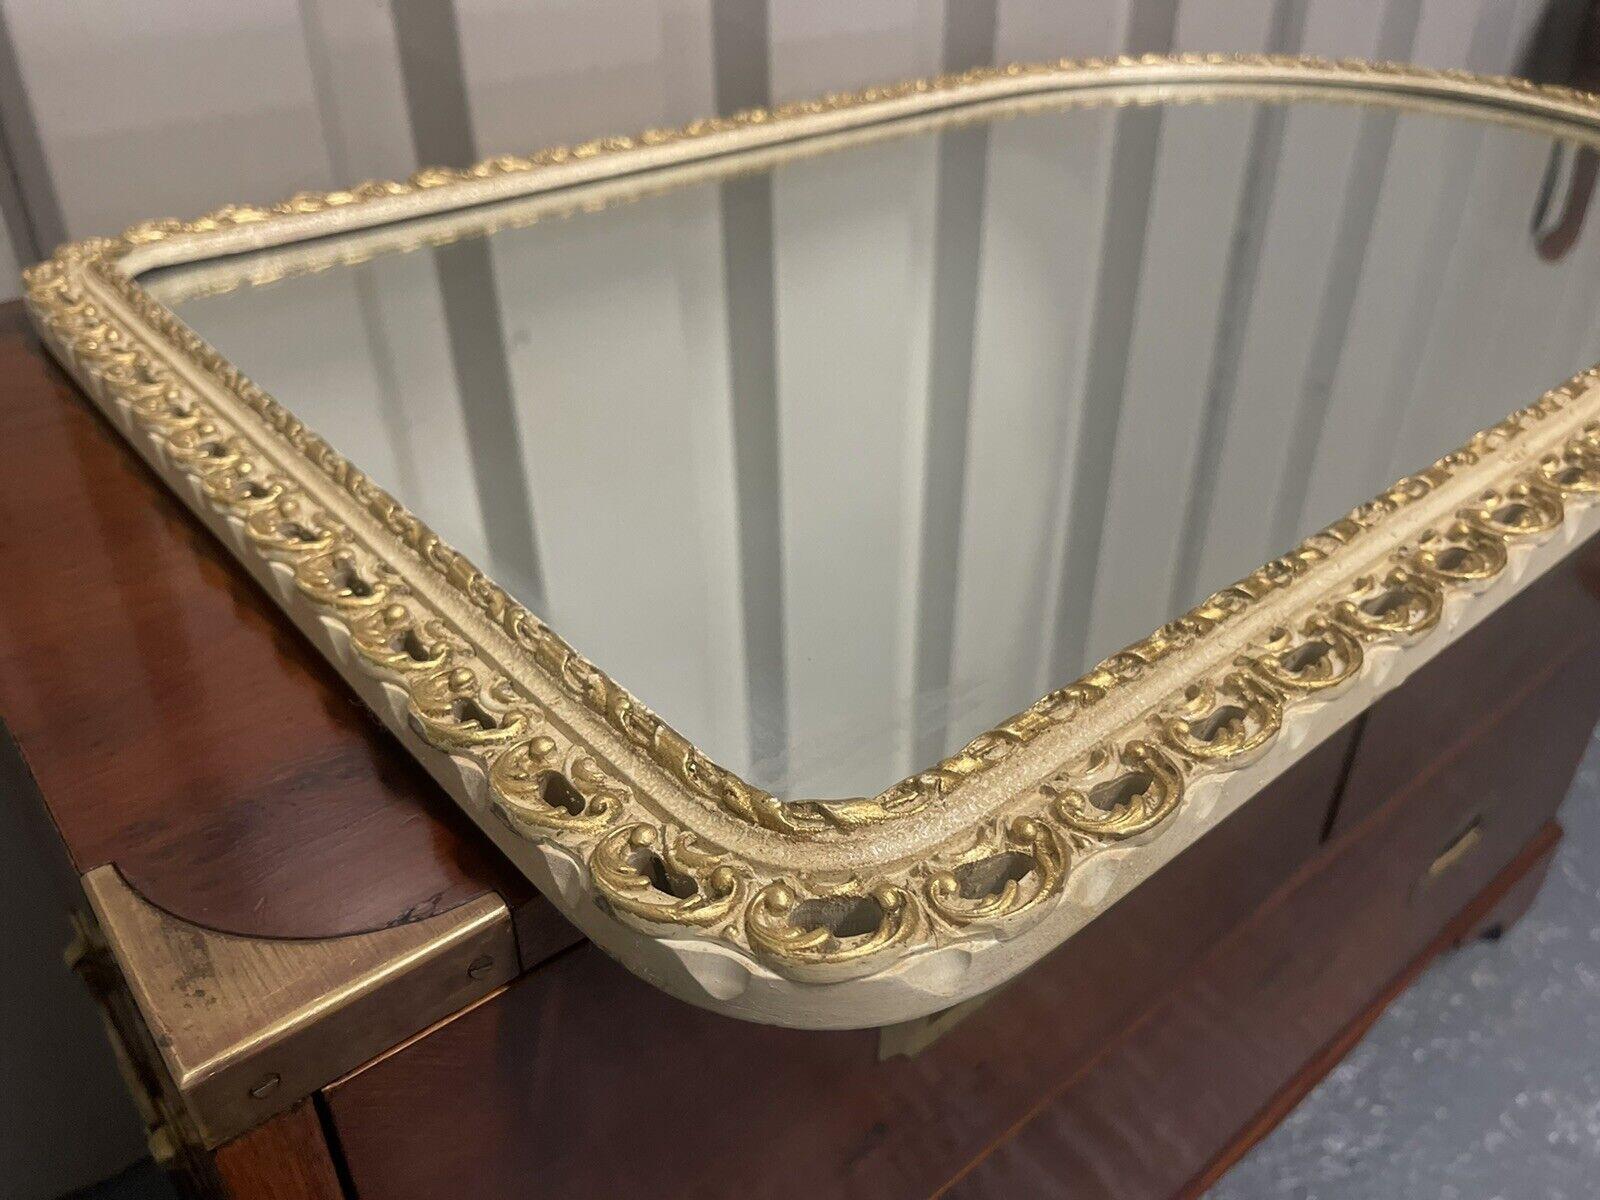 Hand-Crafted Vintage John ''Halls Galvo'' Cream and Gold Gilt-wood Wall Mirror, 1950's For Sale